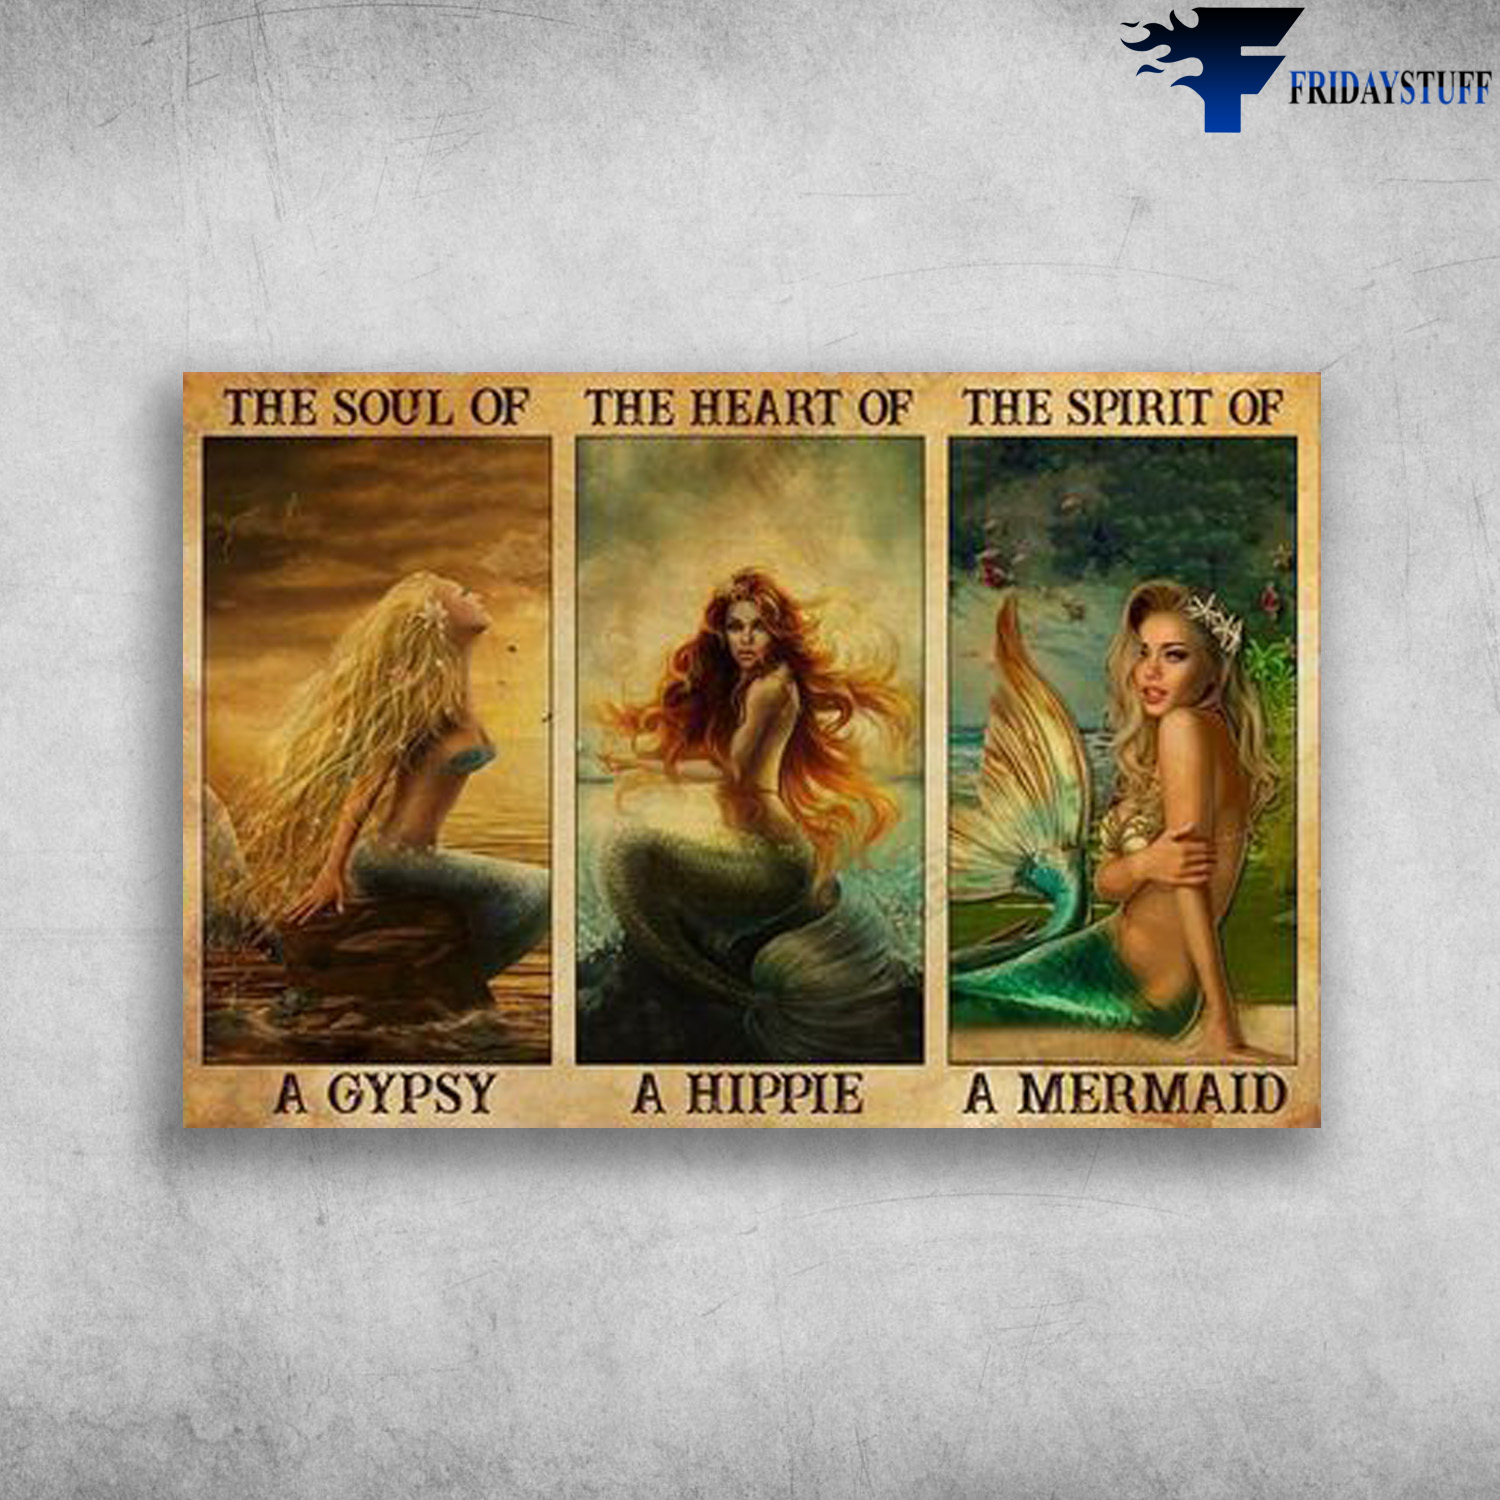 Mermaid - The Soul Of A Gyspy, The Heart Of A Hippie, The Spirit Of A Mermaid